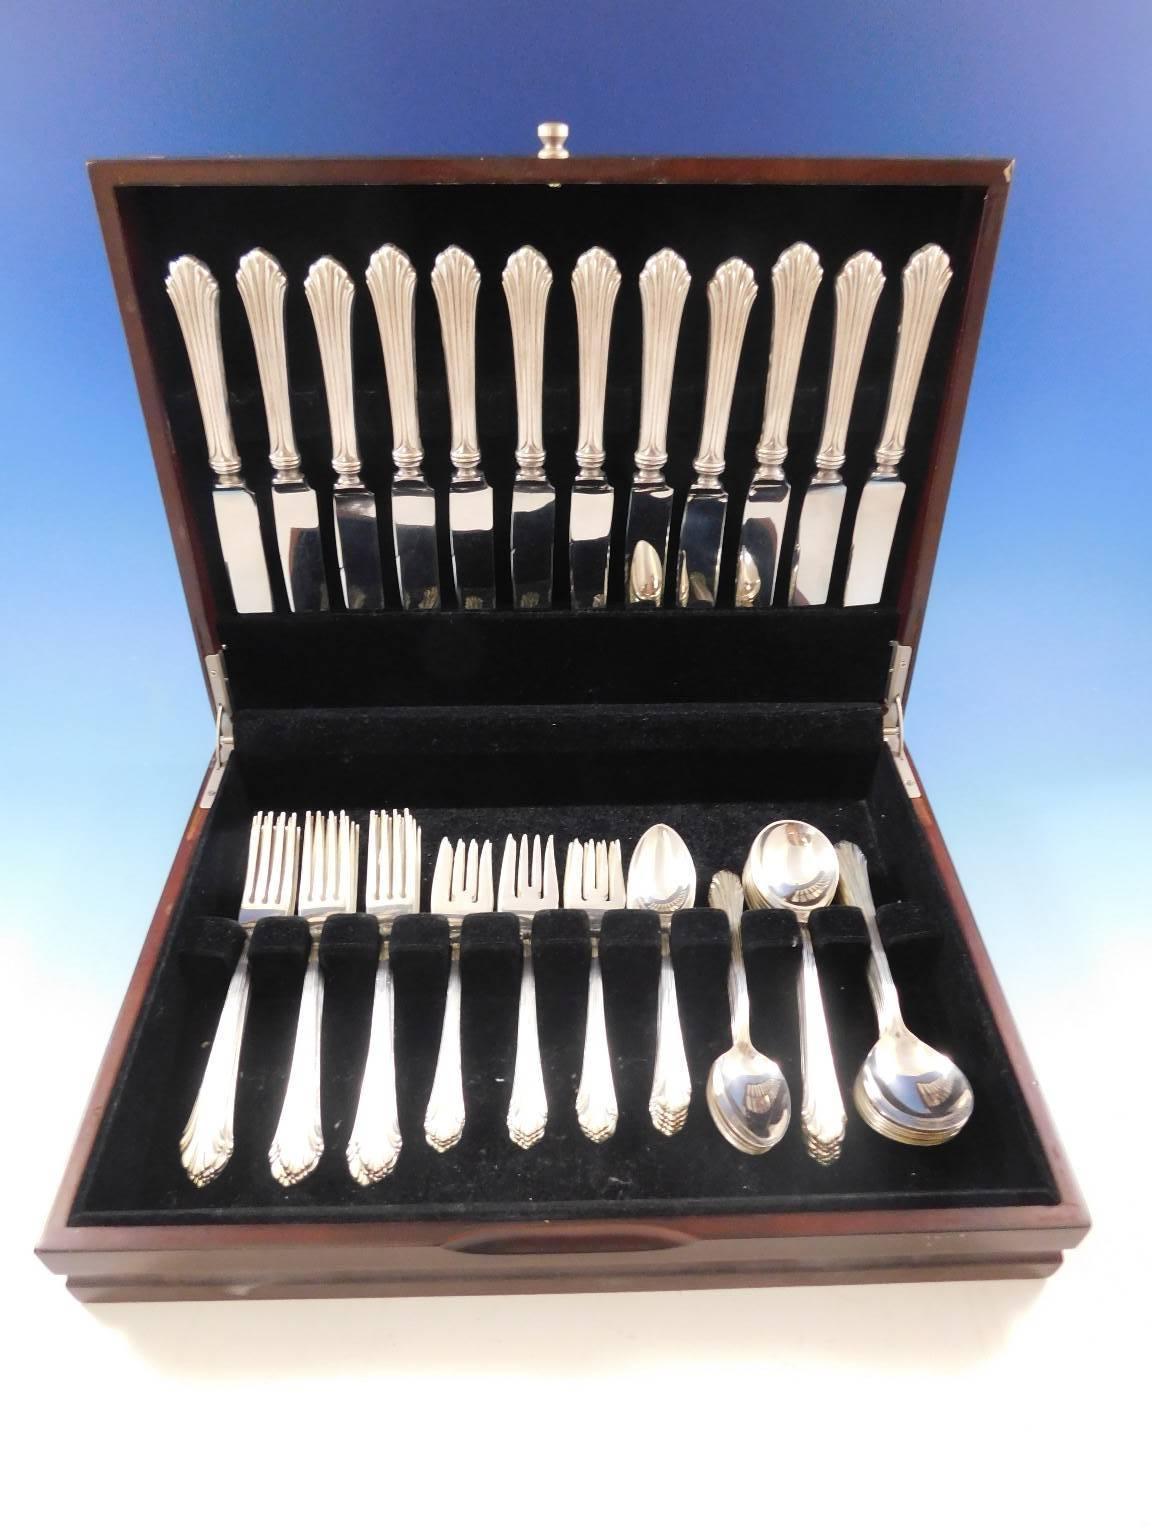 Homewood by Stieff sterling silver Flatware set, 60 pieces. This set includes:

    12 Knives, 9